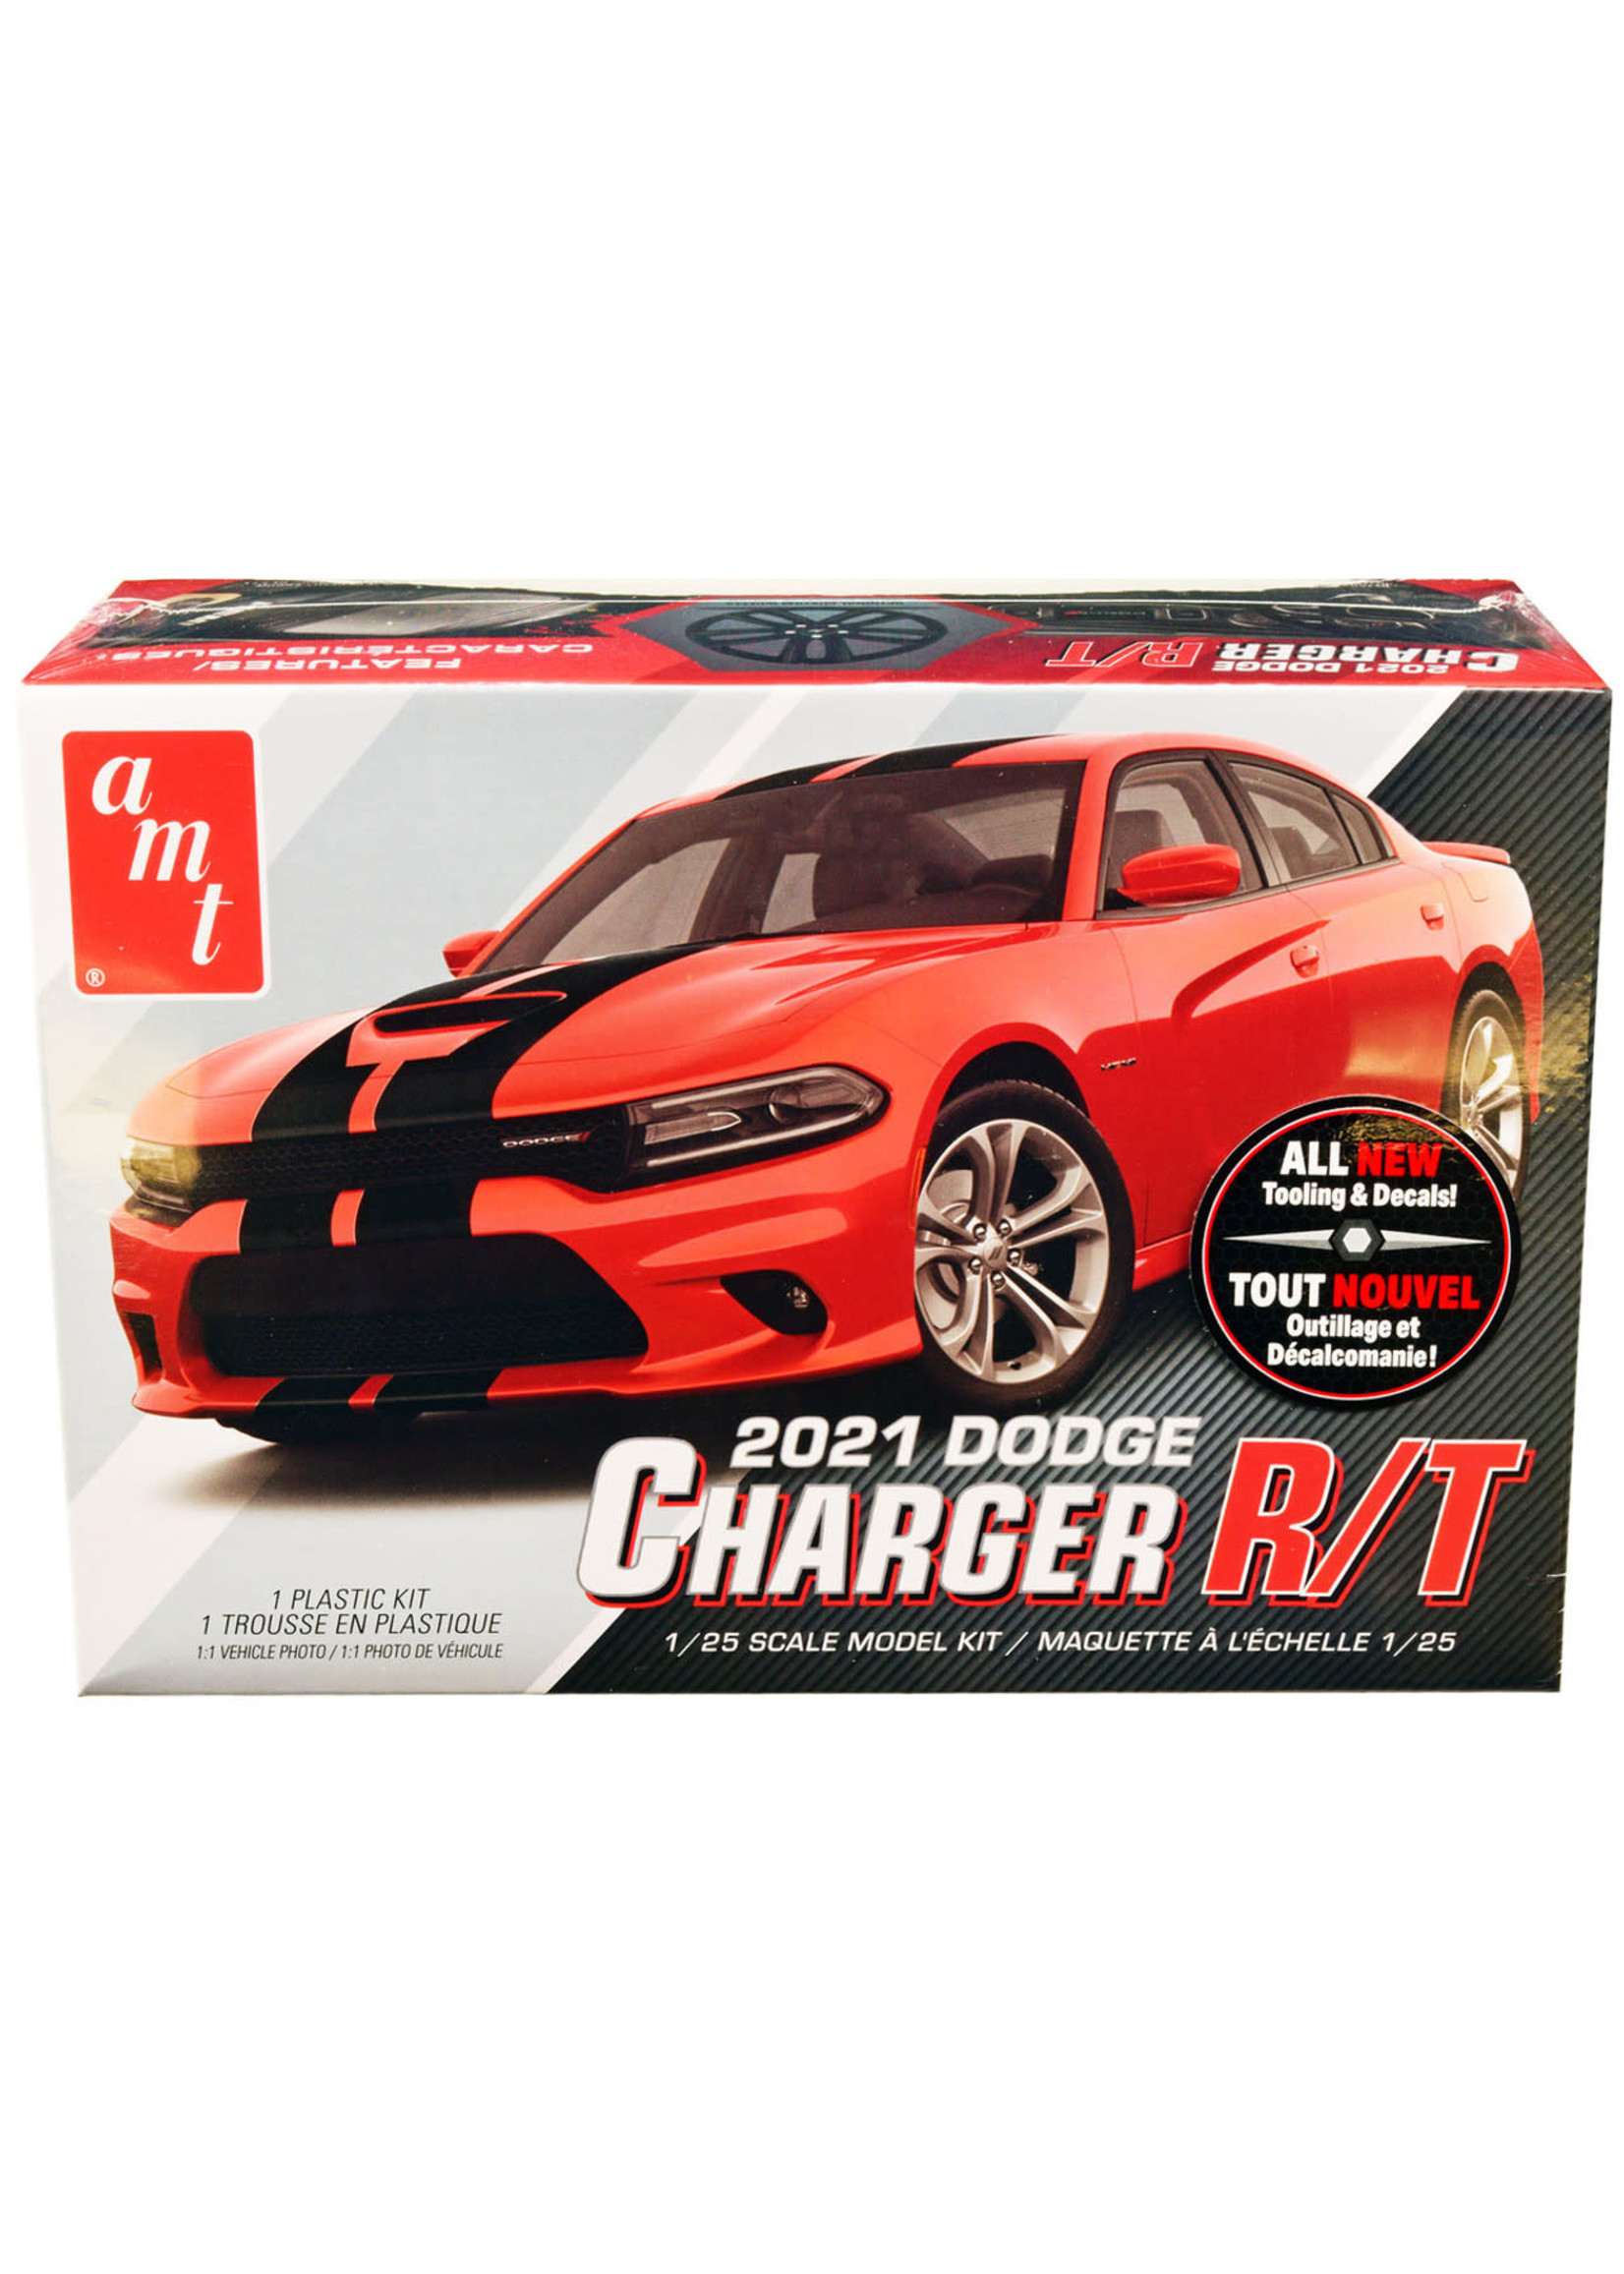 amt 2021 Dodge charger R/T (1/25)